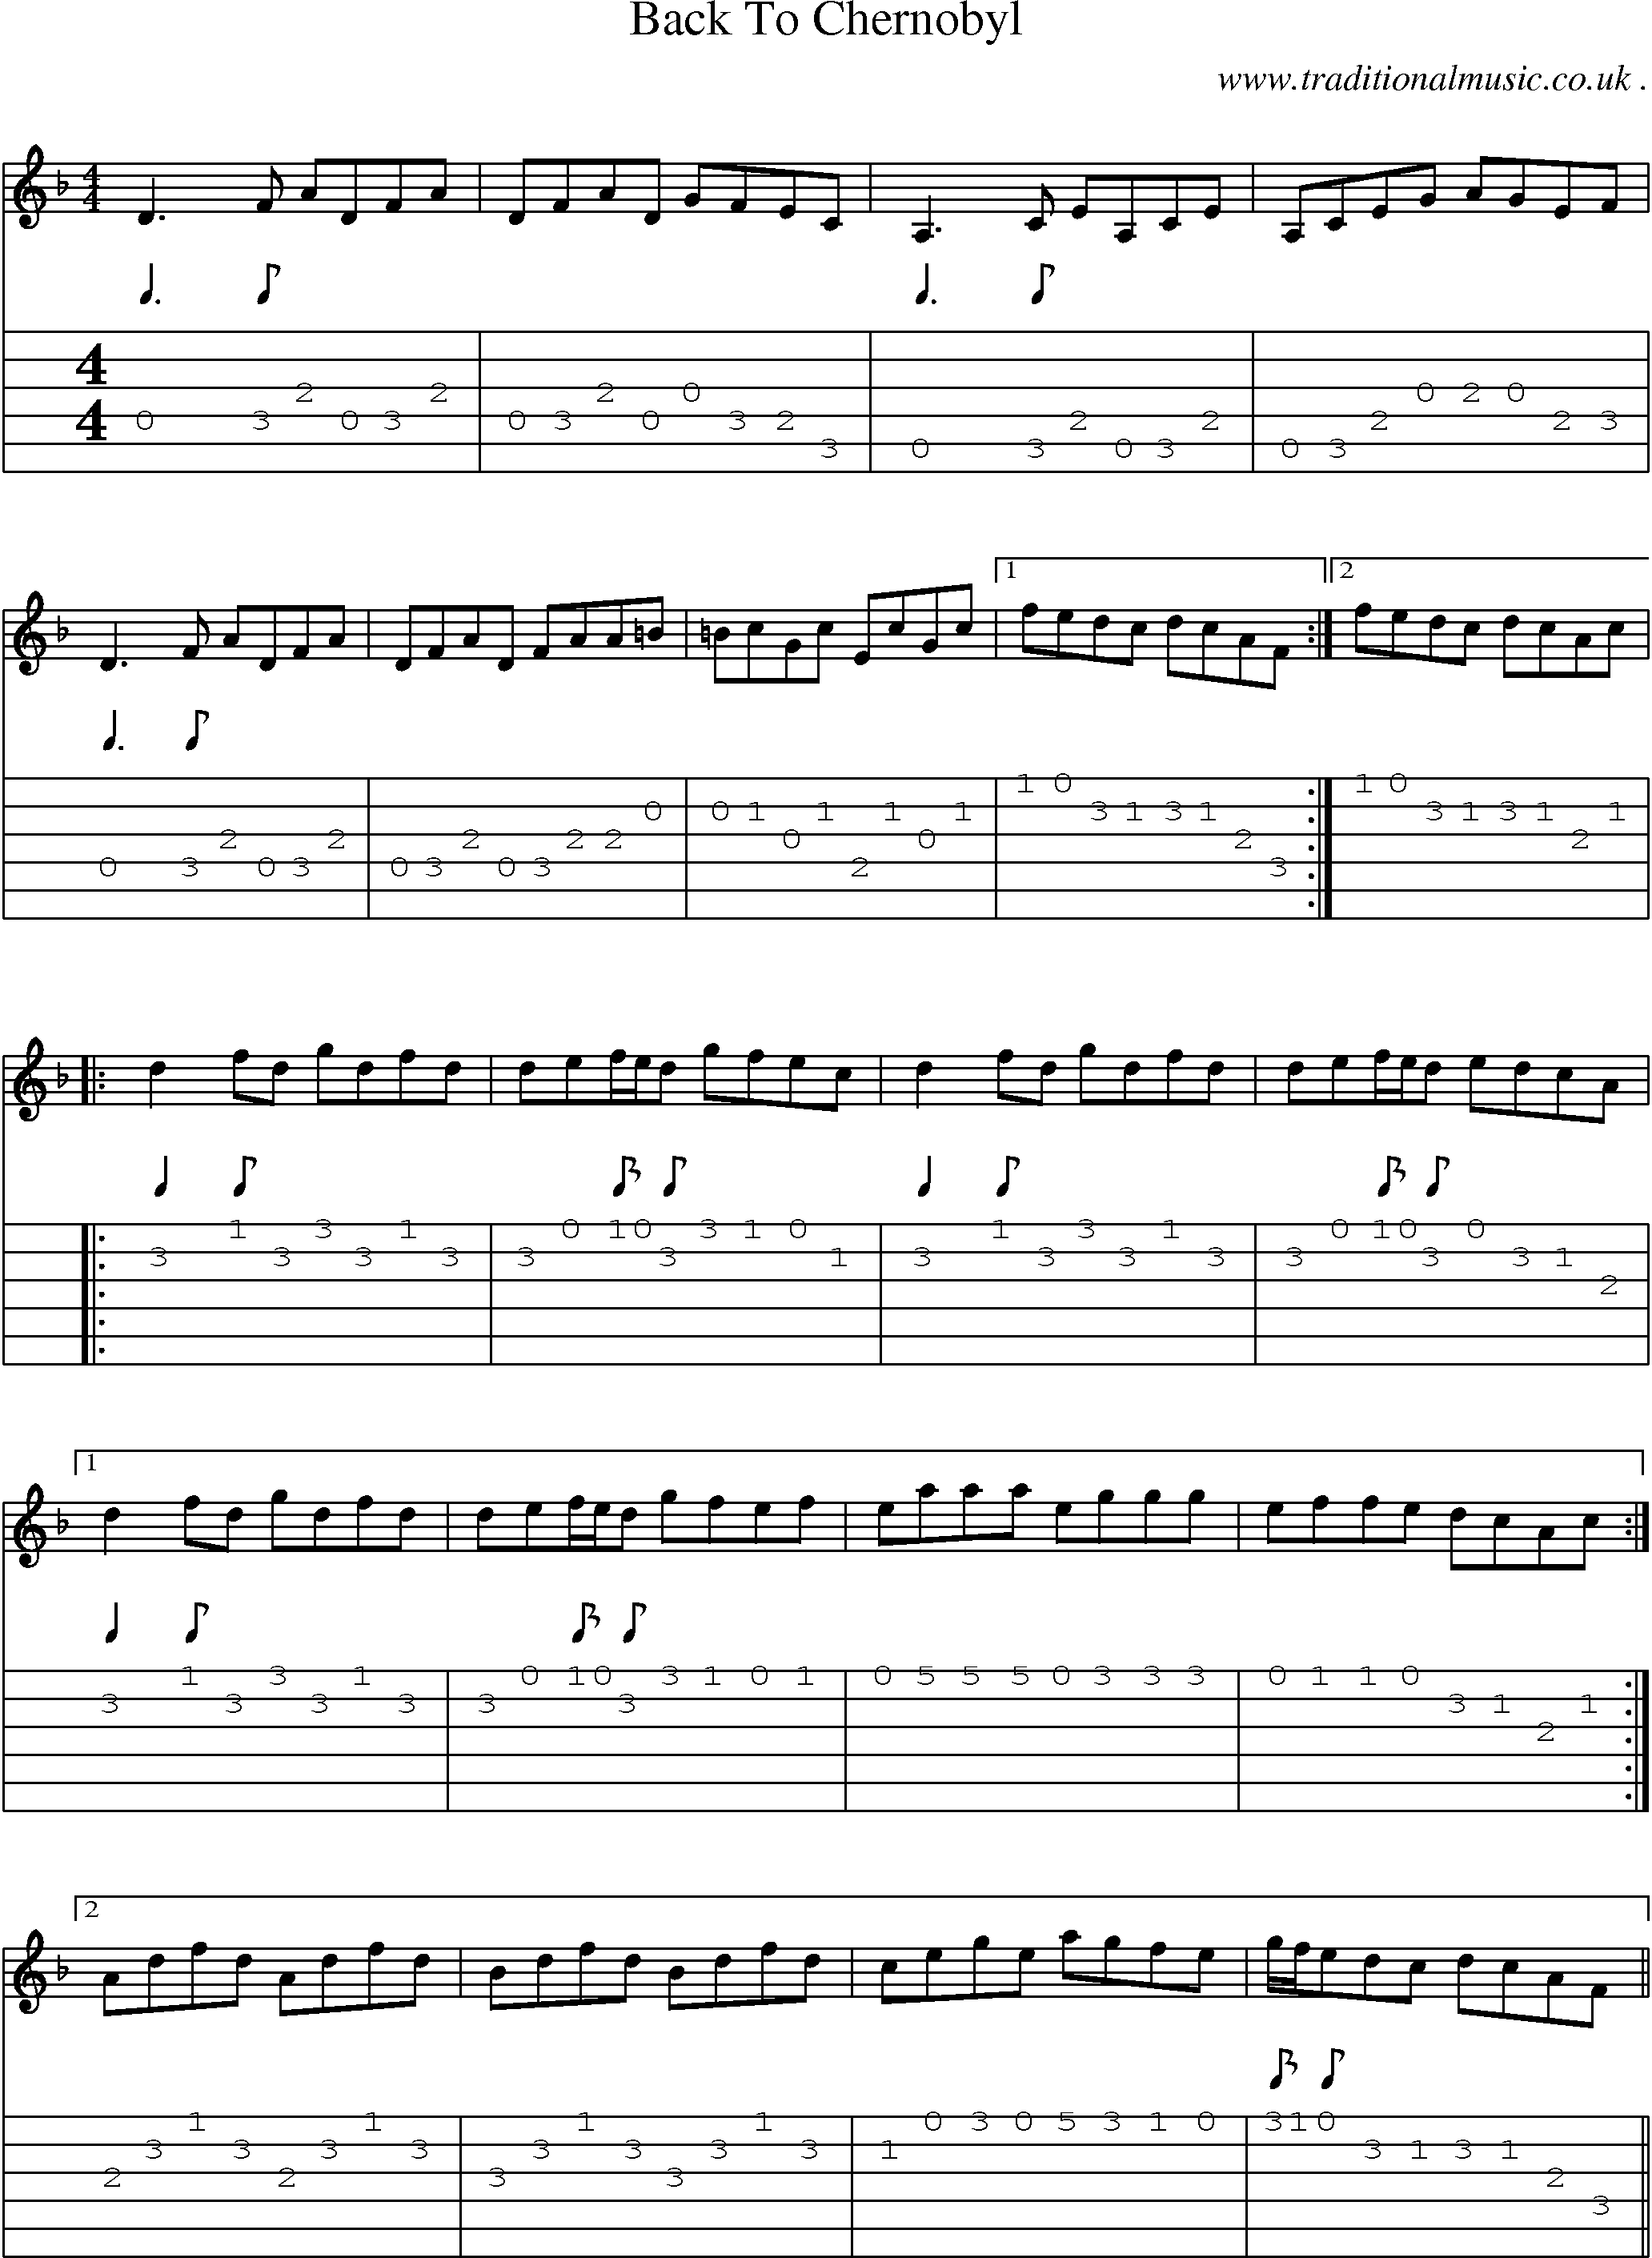 Sheet-Music and Guitar Tabs for Back To Chernobyl